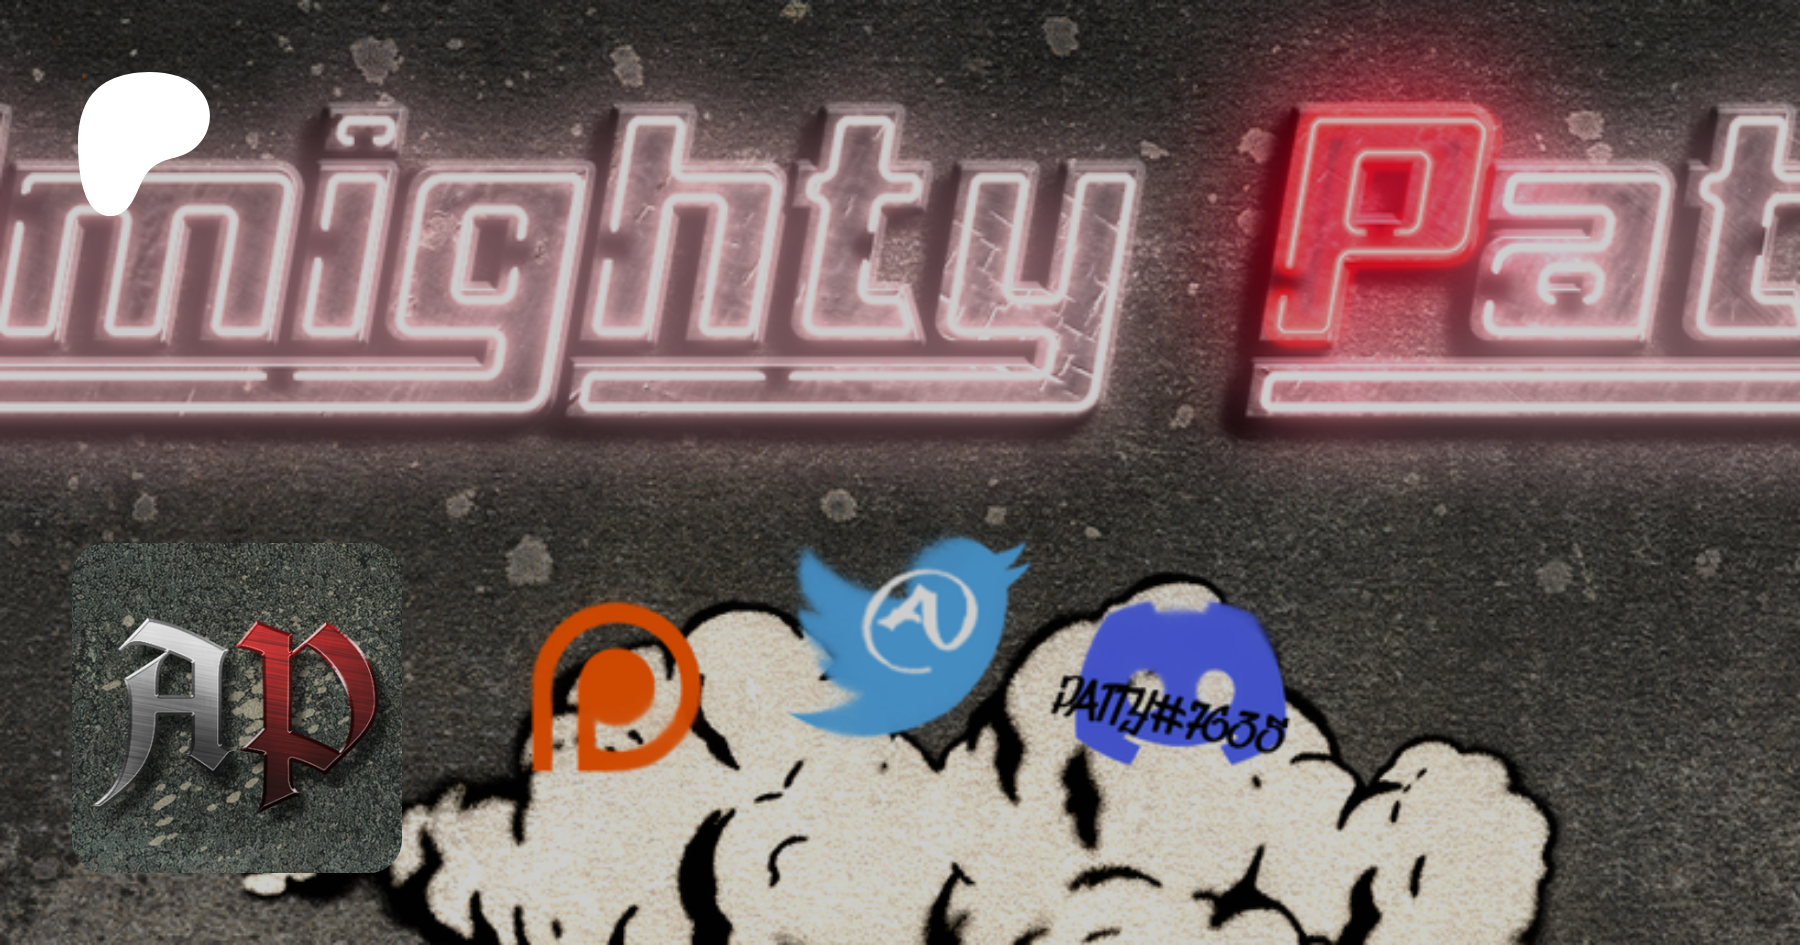 Almighty Patty | creating 3D animations for your viewing pleasure! | Patreon